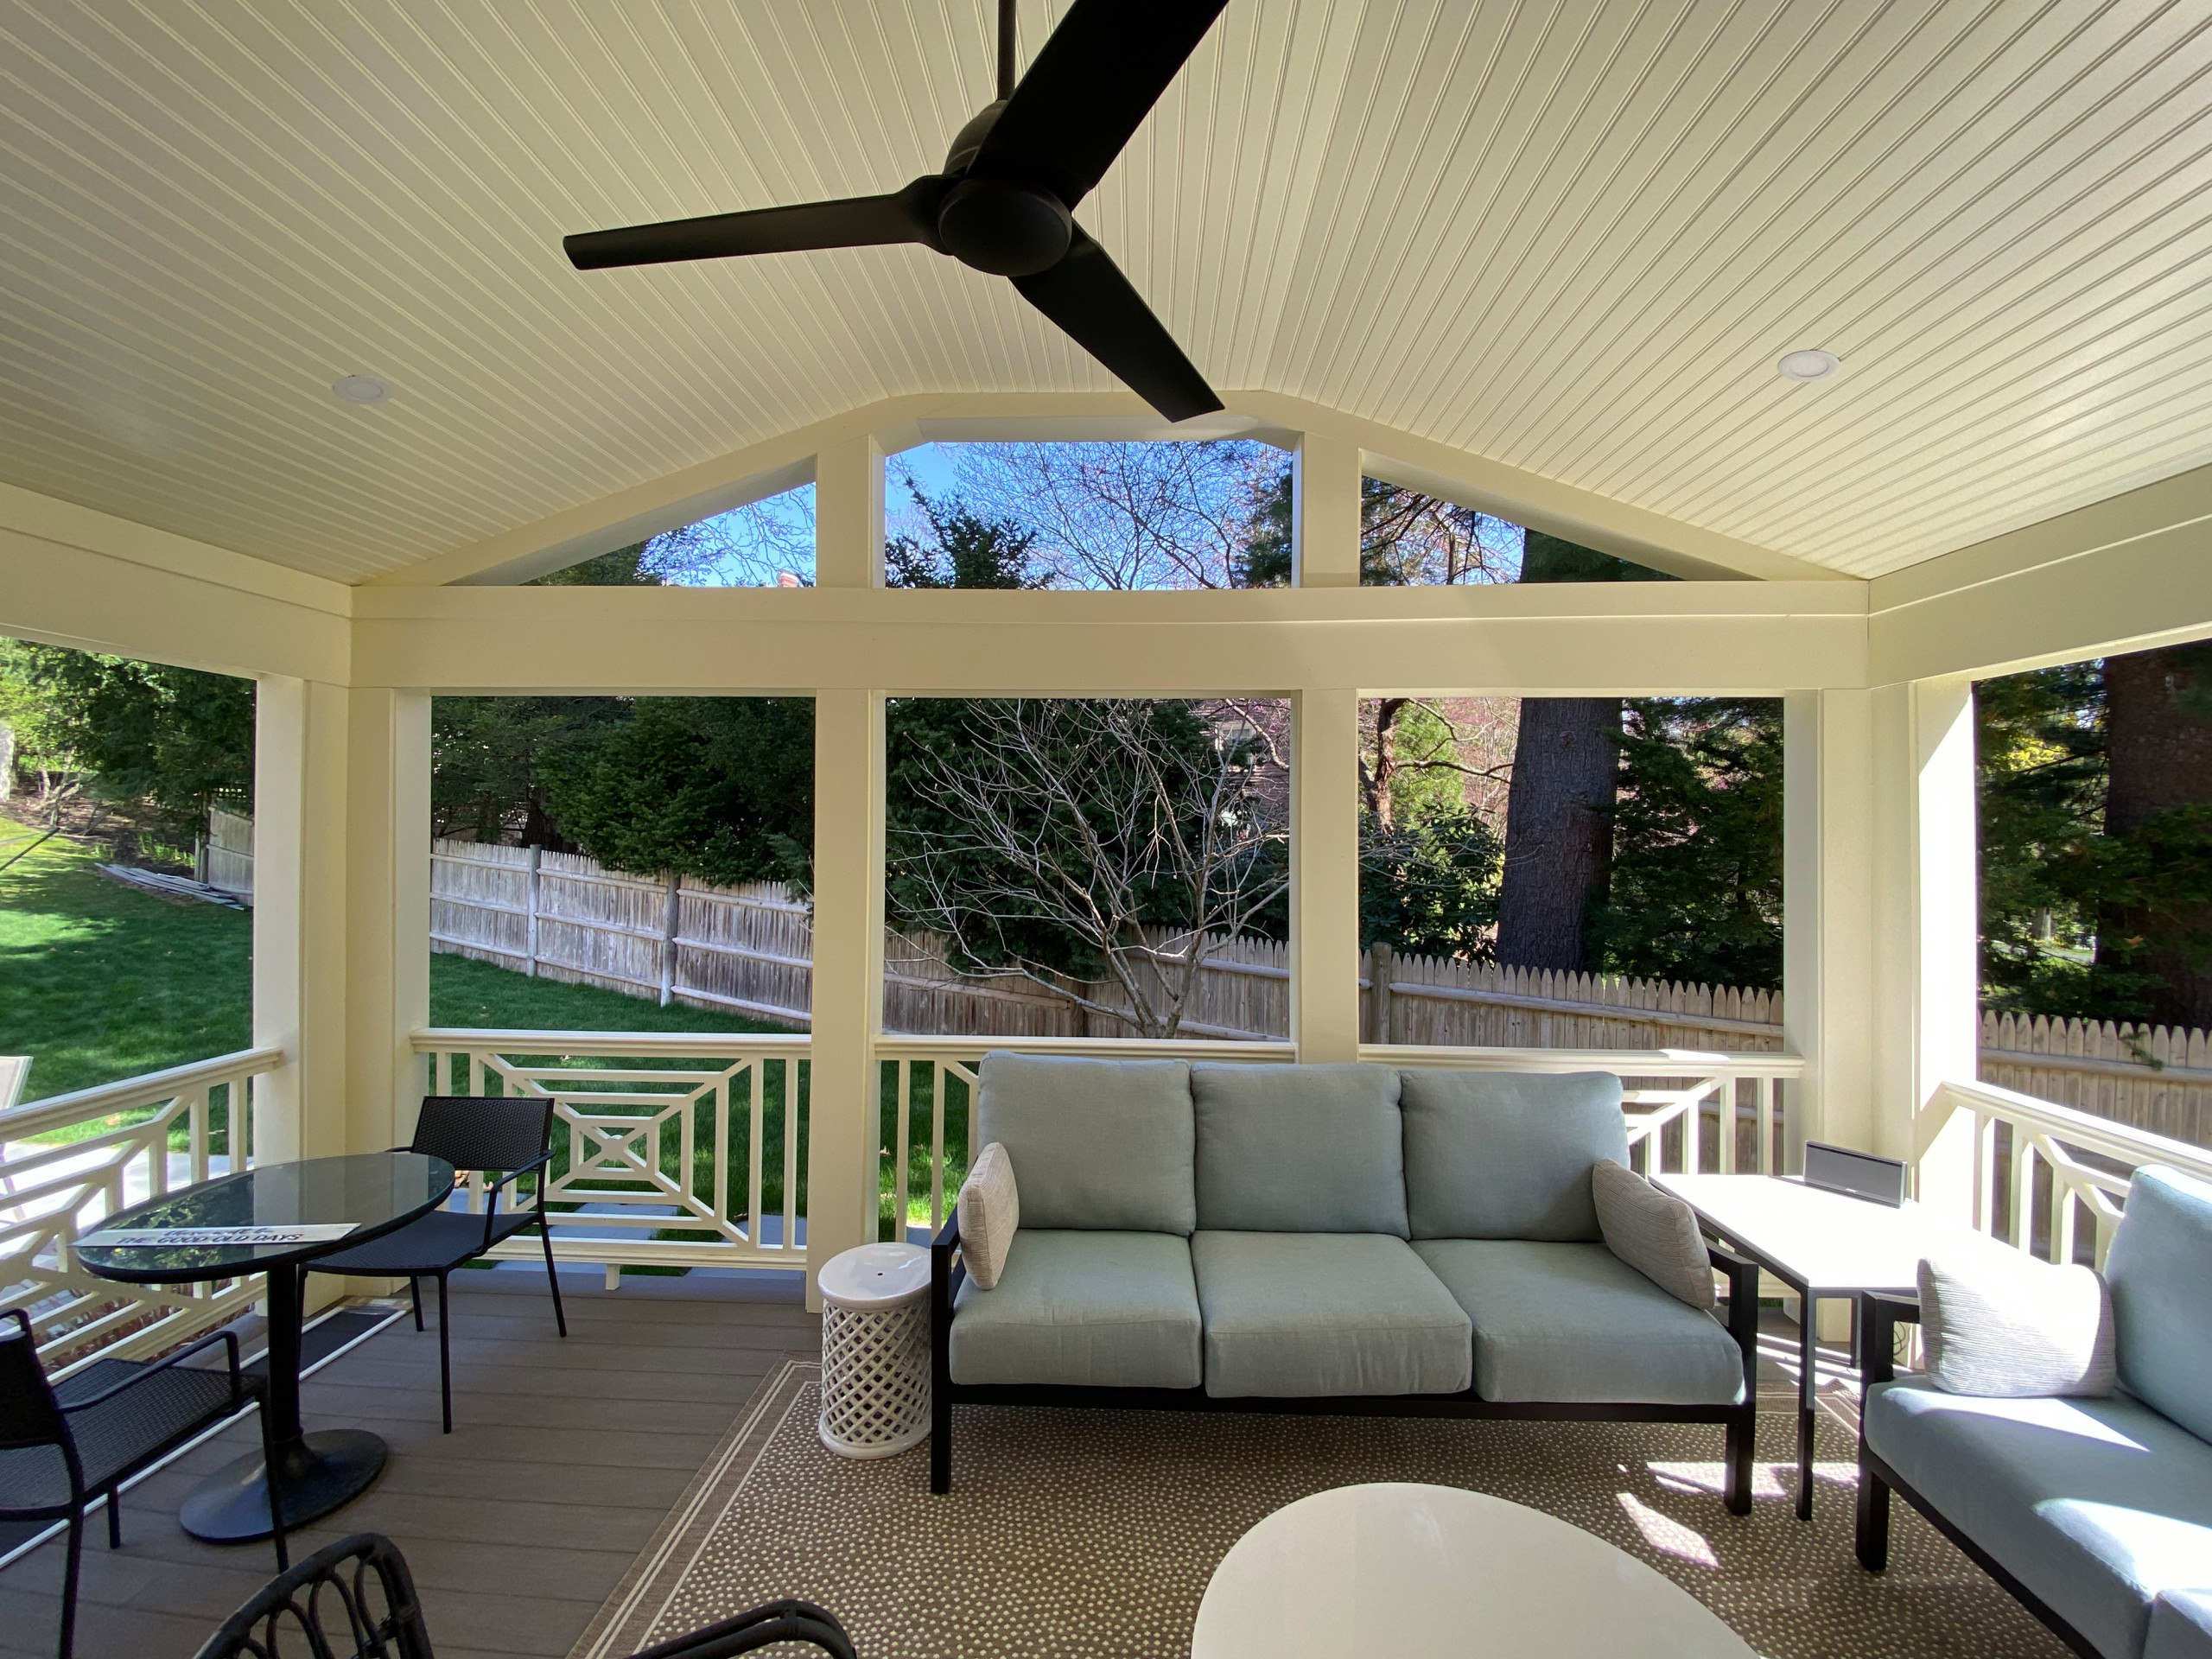 "Outdoor Room" Addition with Patio